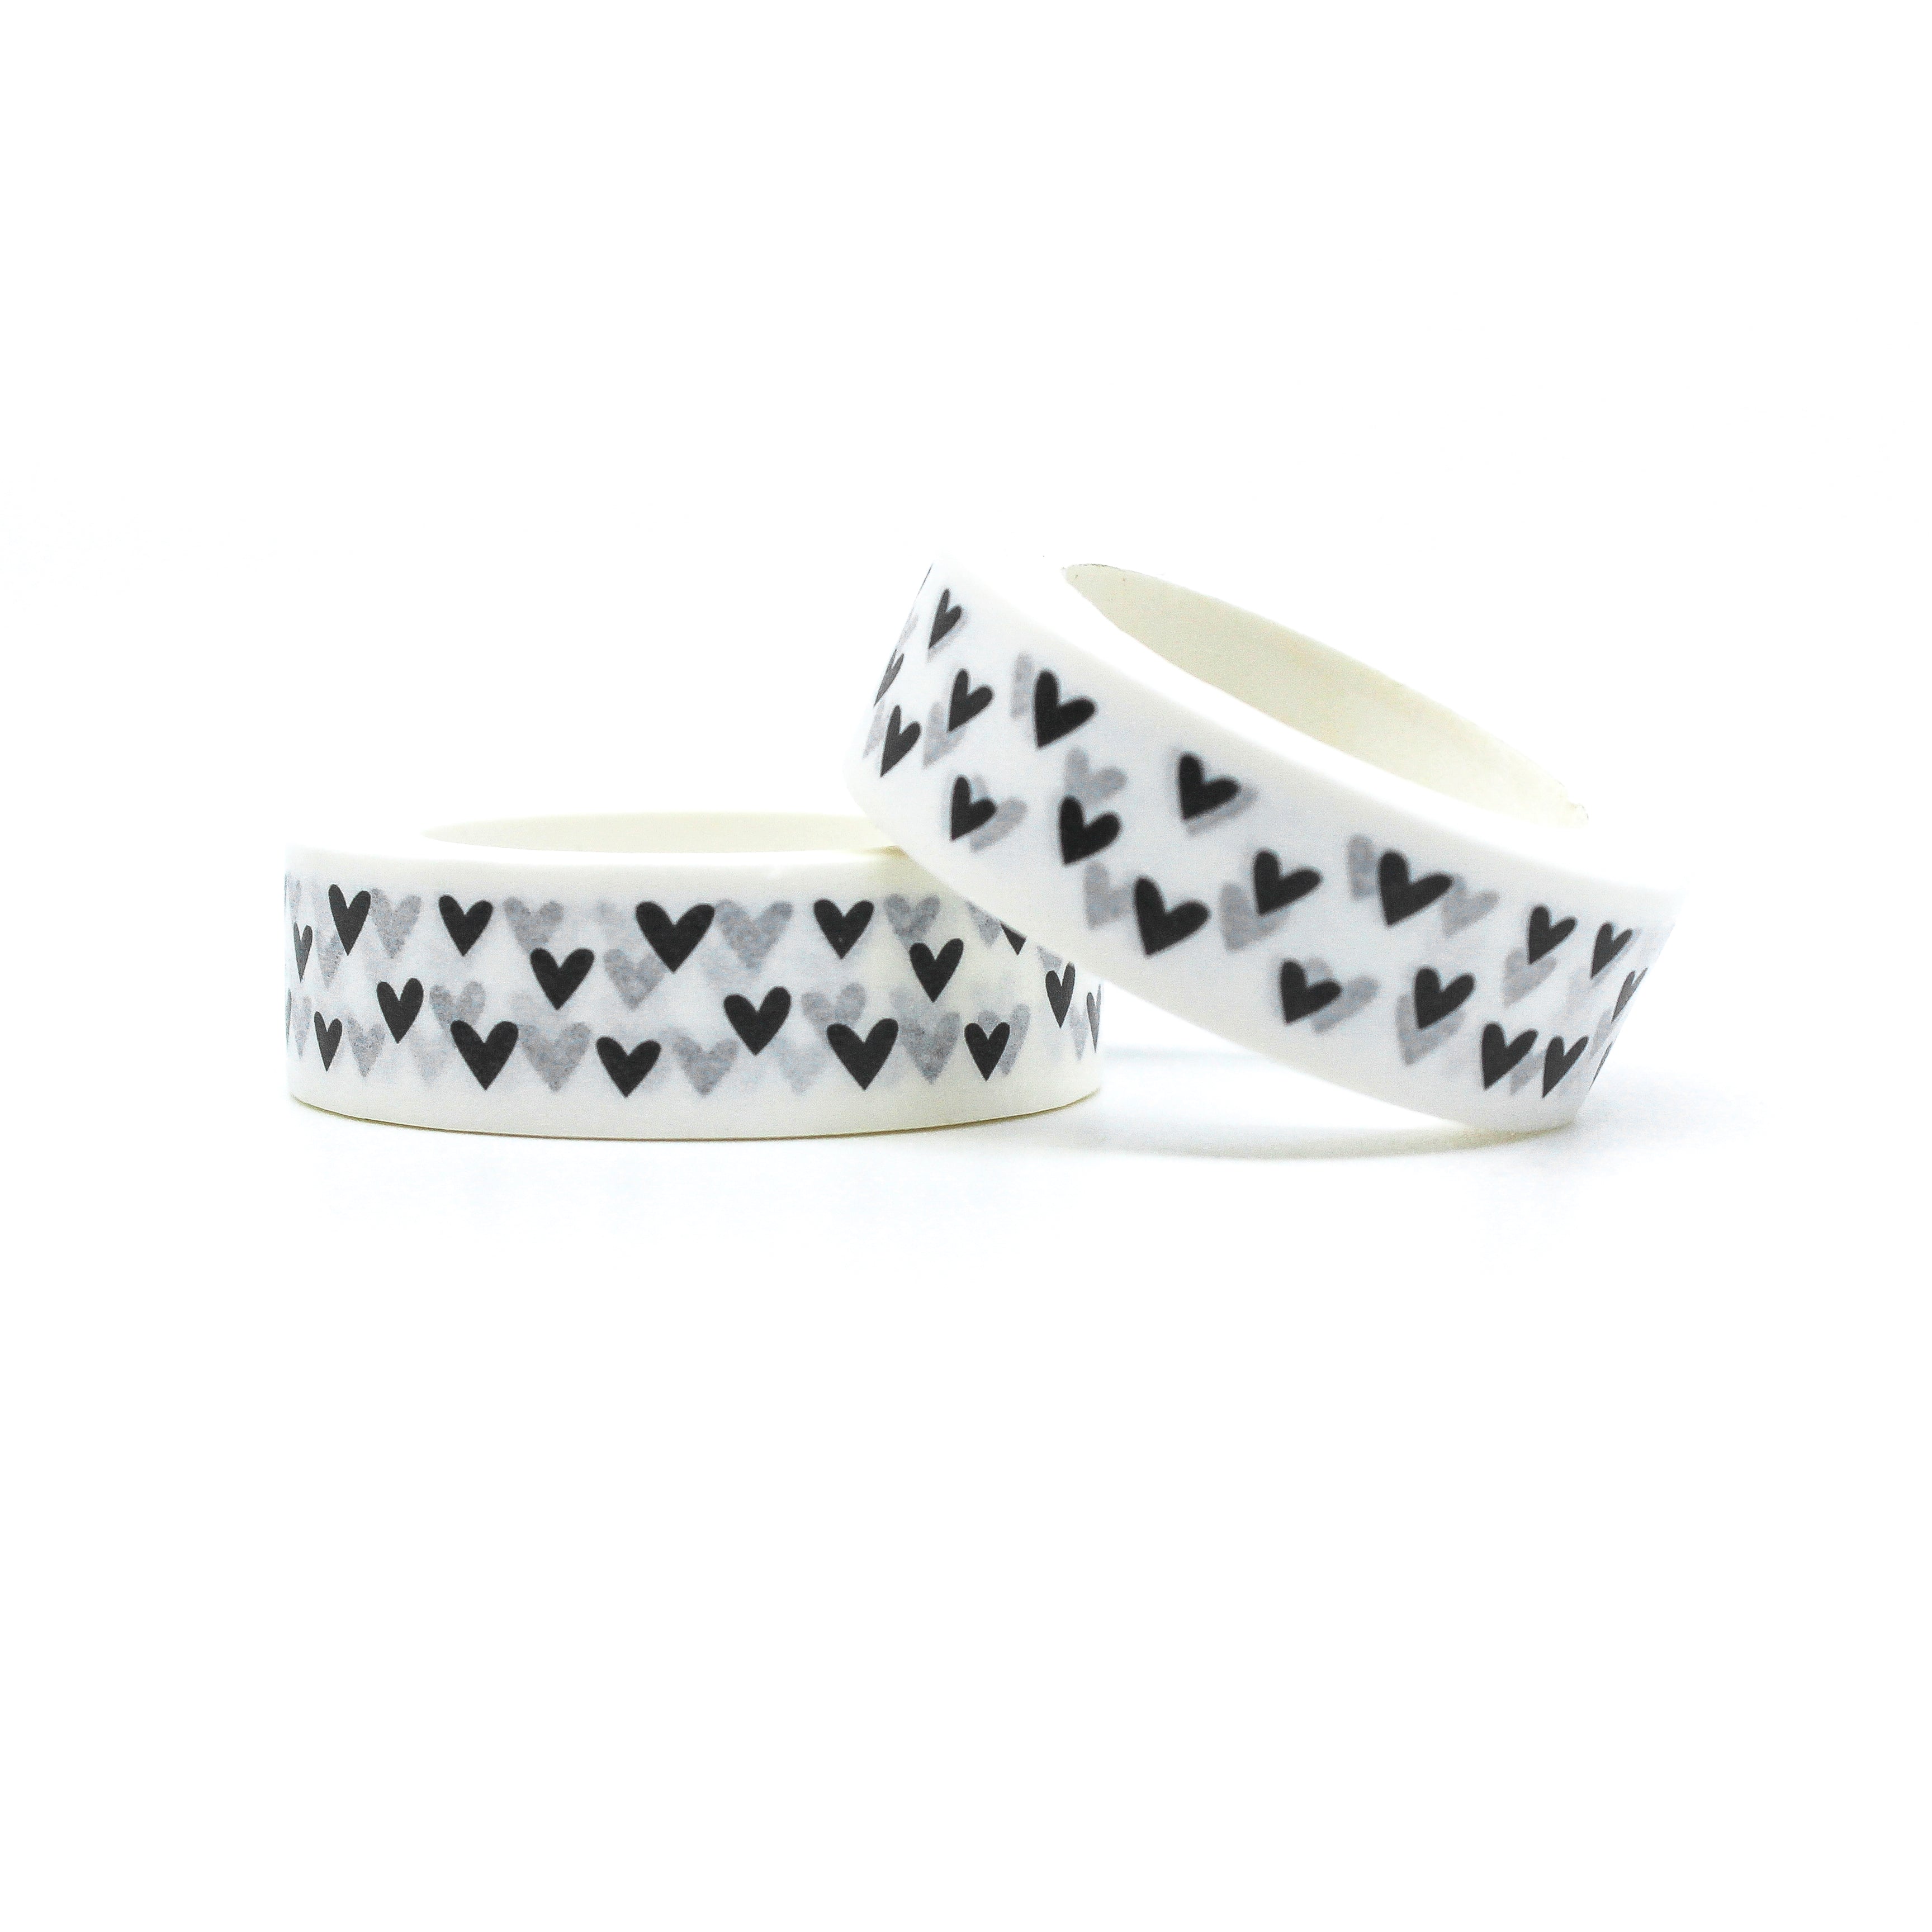 This is a beautiful collections of tiny black hearts in washi tapes from BBB Supplies Craft Shop